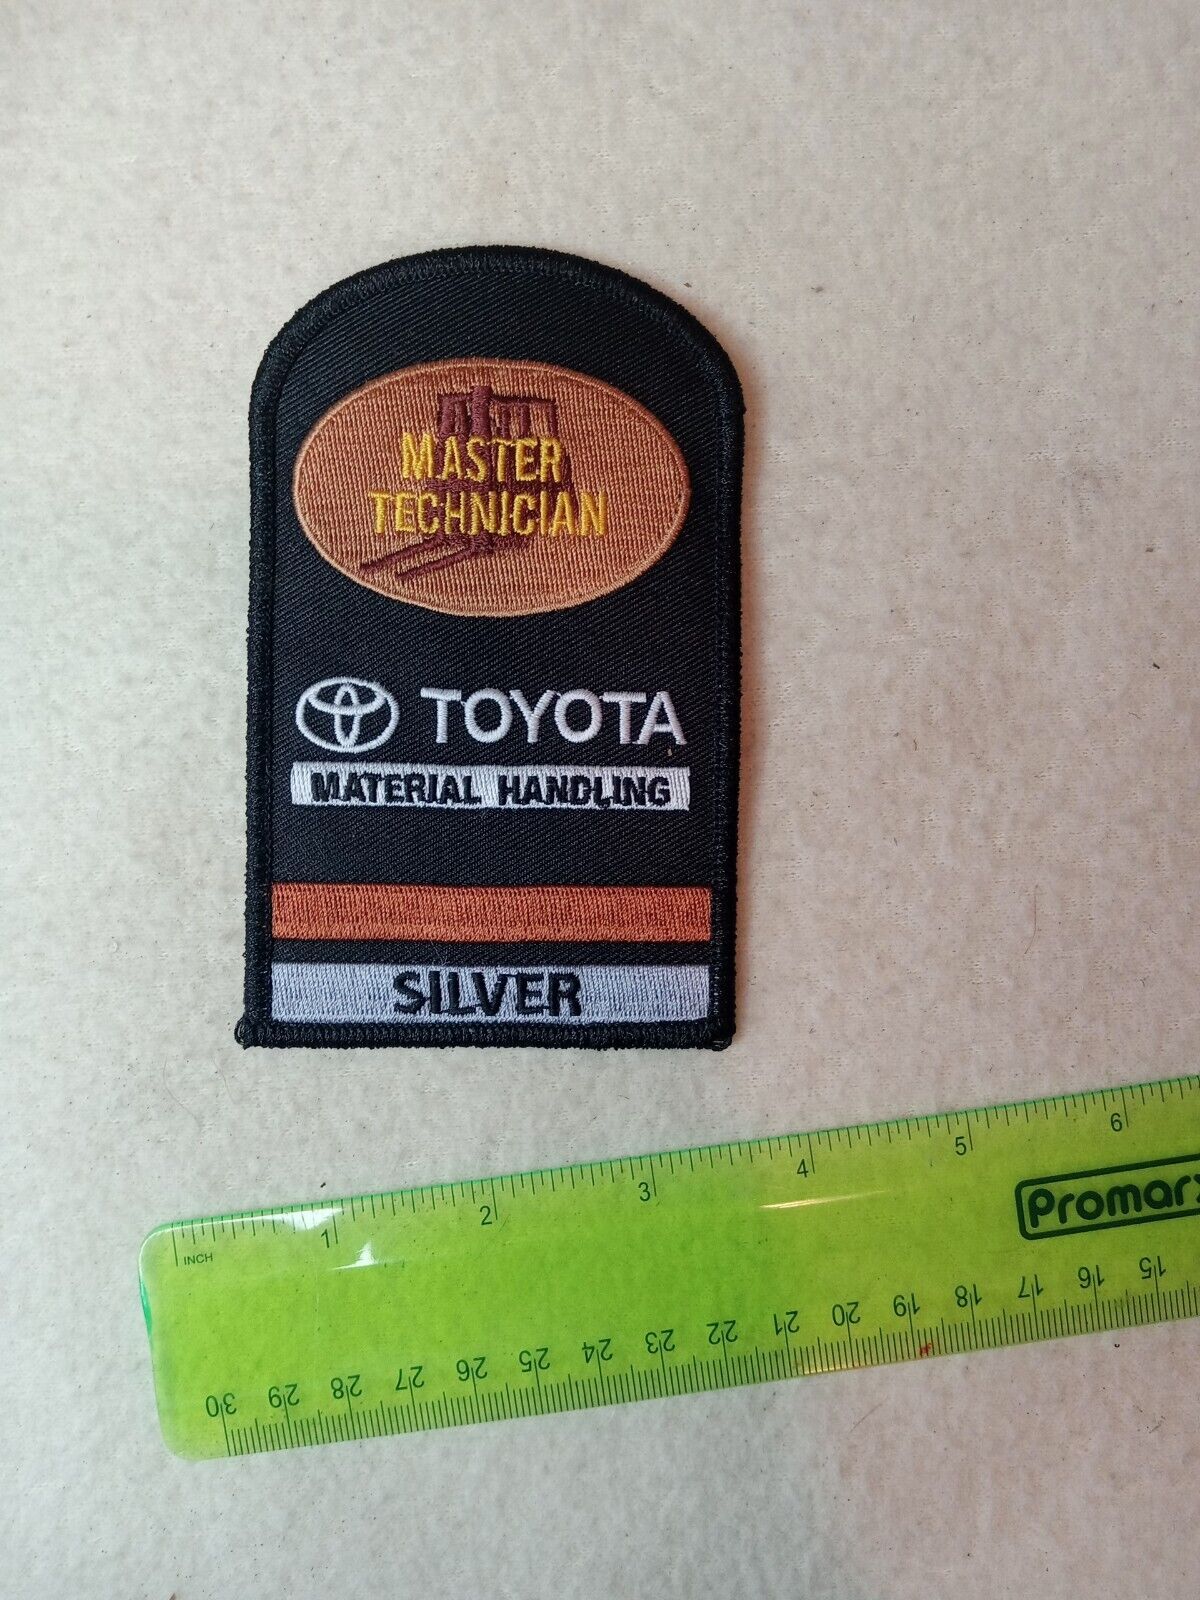 Toyota Material Handling, Master Technician, Silver level, arm patch